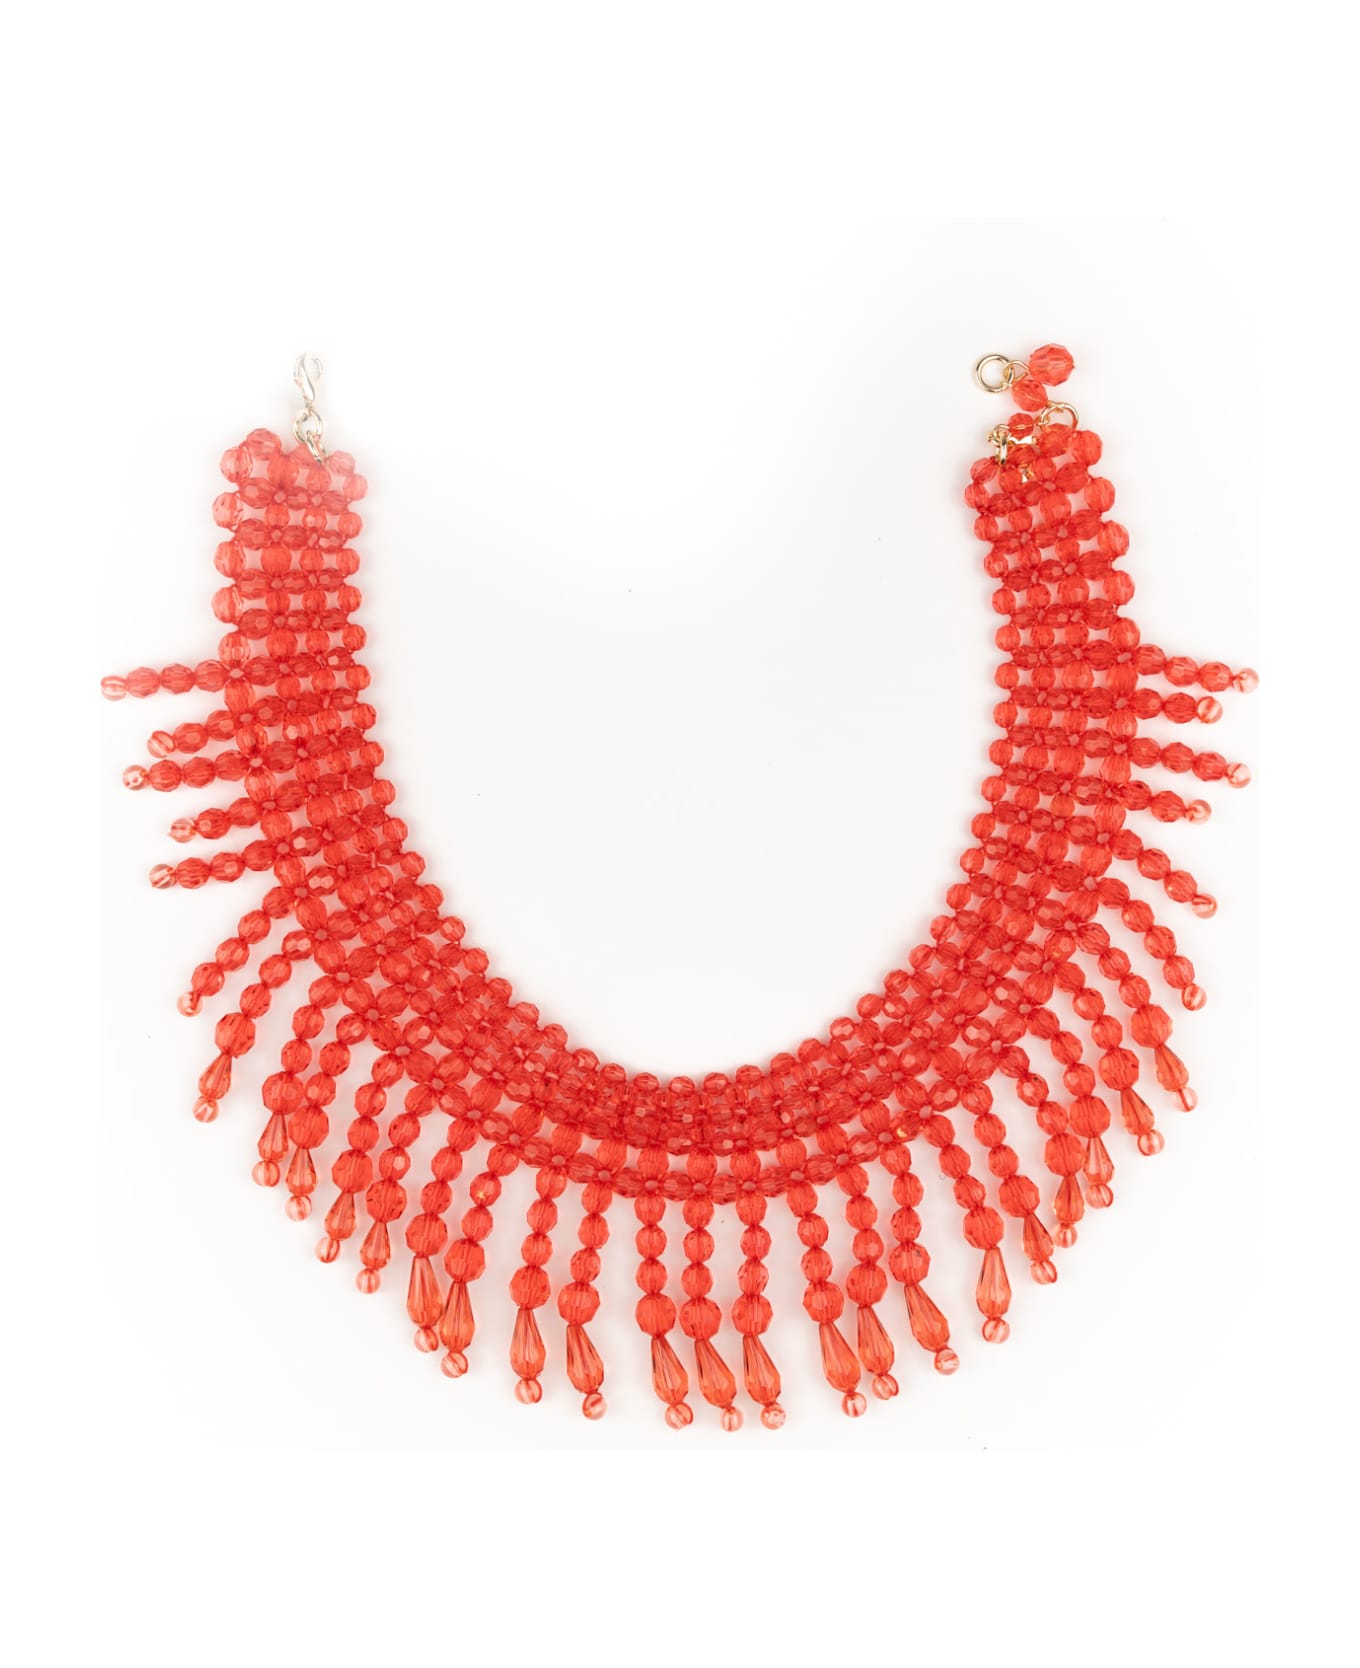 TwinSet Necklace With Red Glass Beads - Orange sun